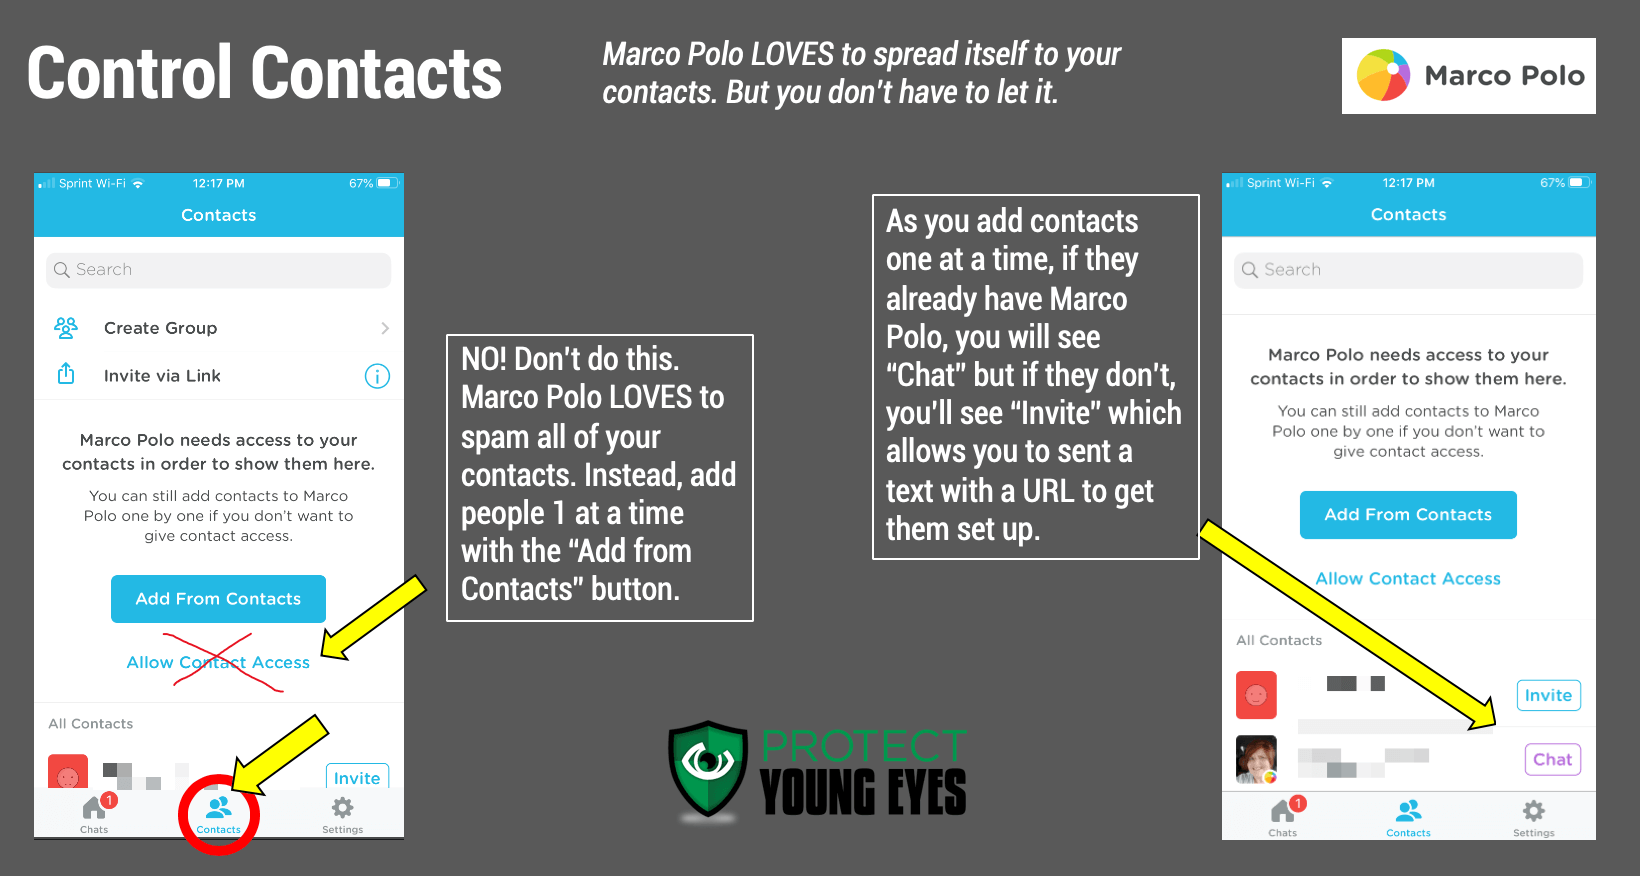 Marco Polo App Review For Parents Caring Adults Protect Young Eyes - follow me on tik rok roblox episode zepeto noizz